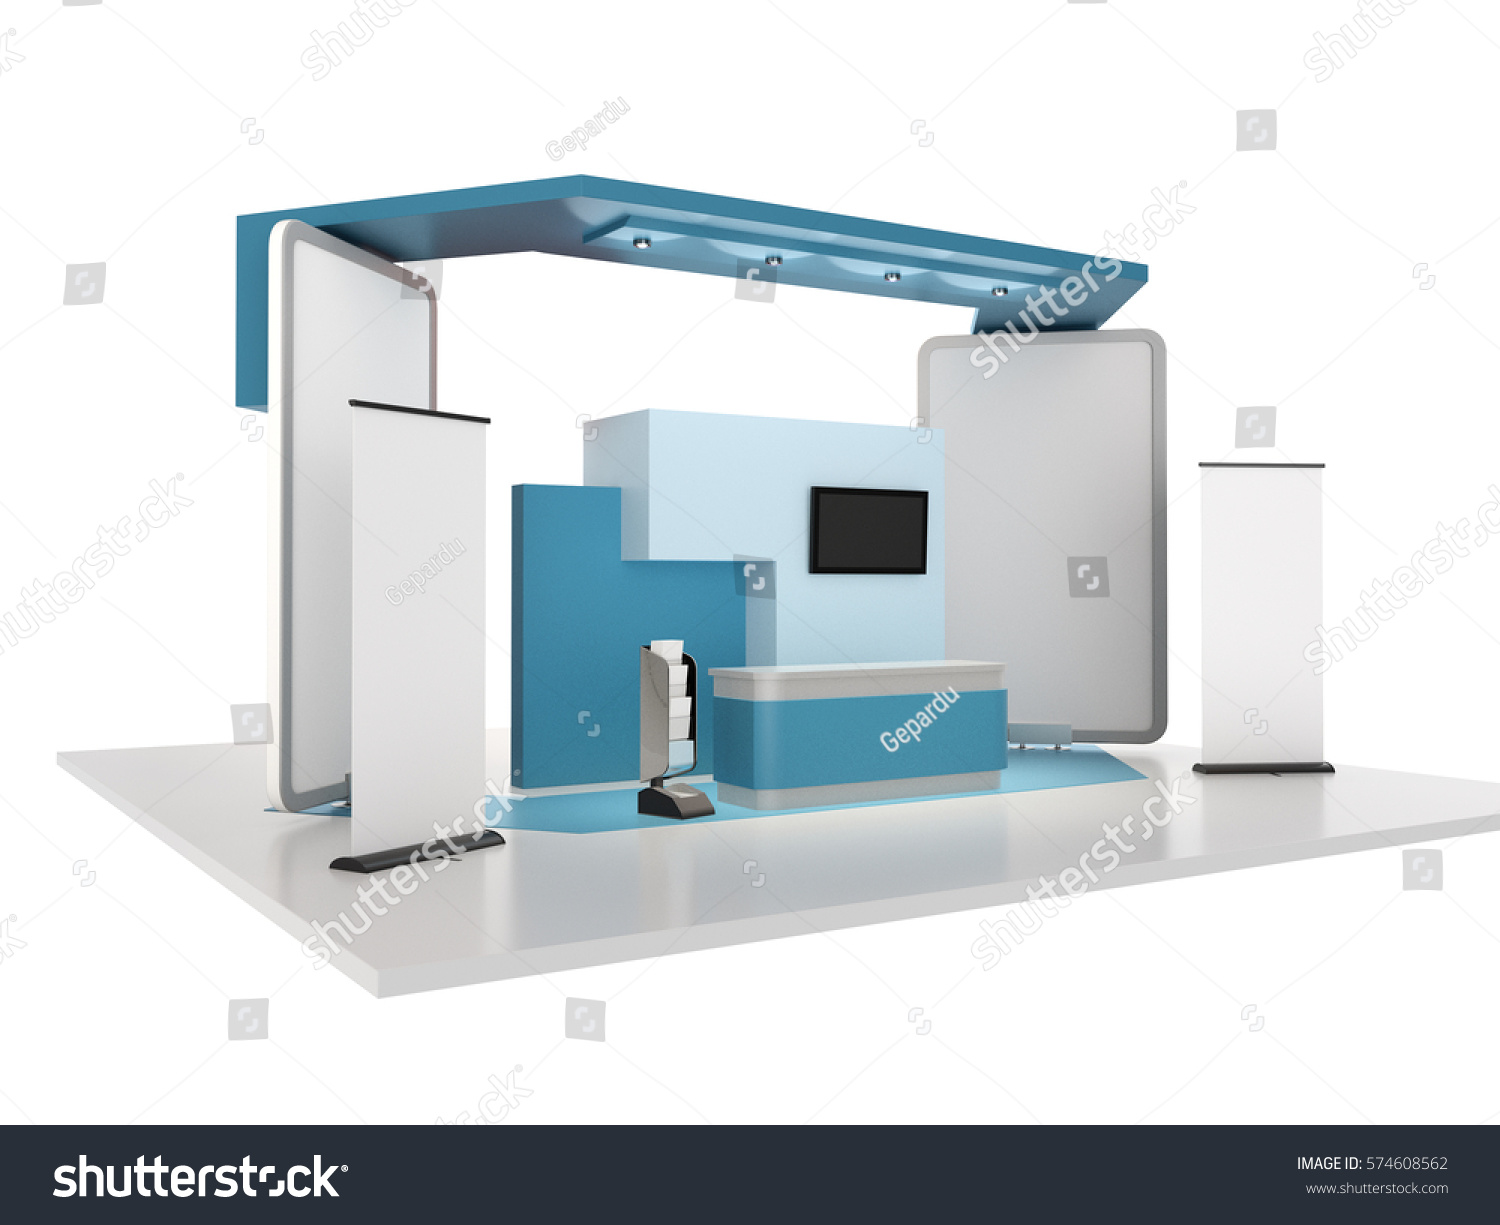 Download Blue Stand Booth Mockup Template 3d Stock Illustration 574608562 PSD Mockup Templates